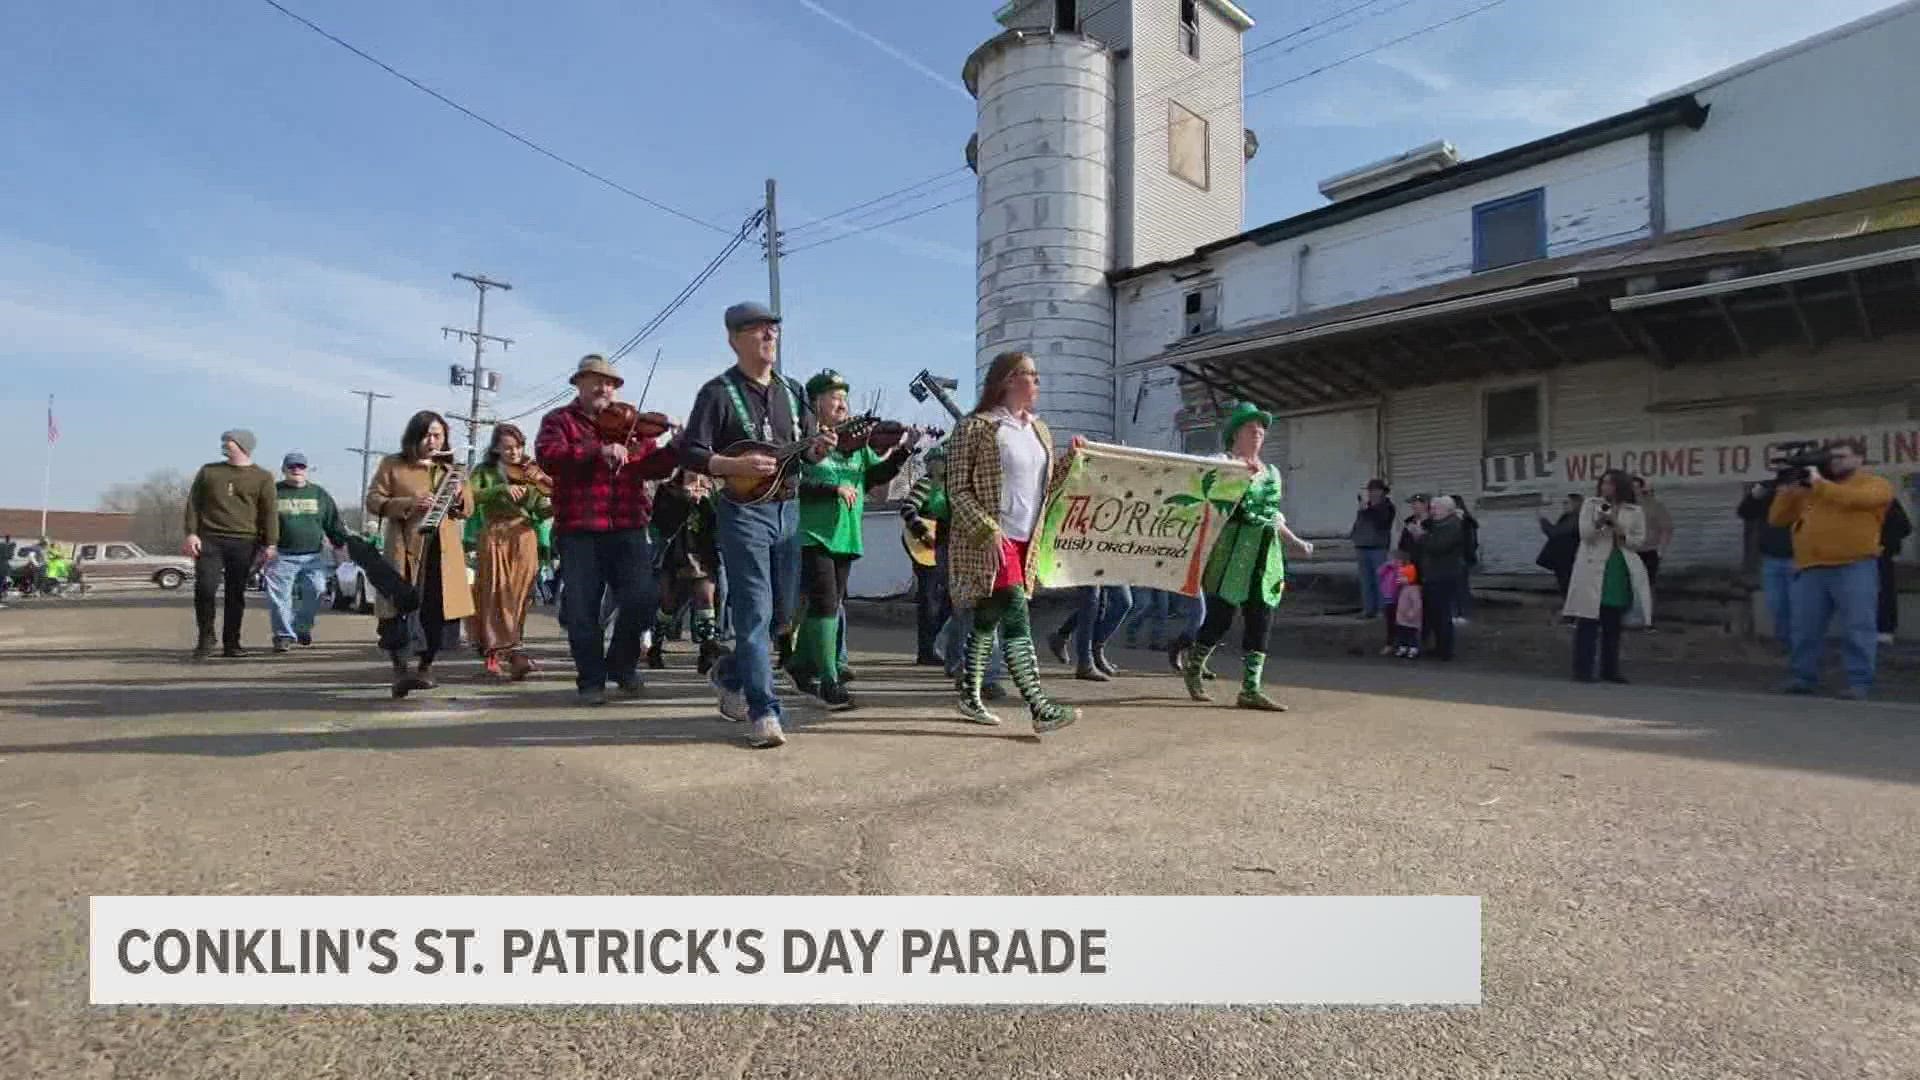 Musicians from all over West Michigan stepped up to help the parade go on.